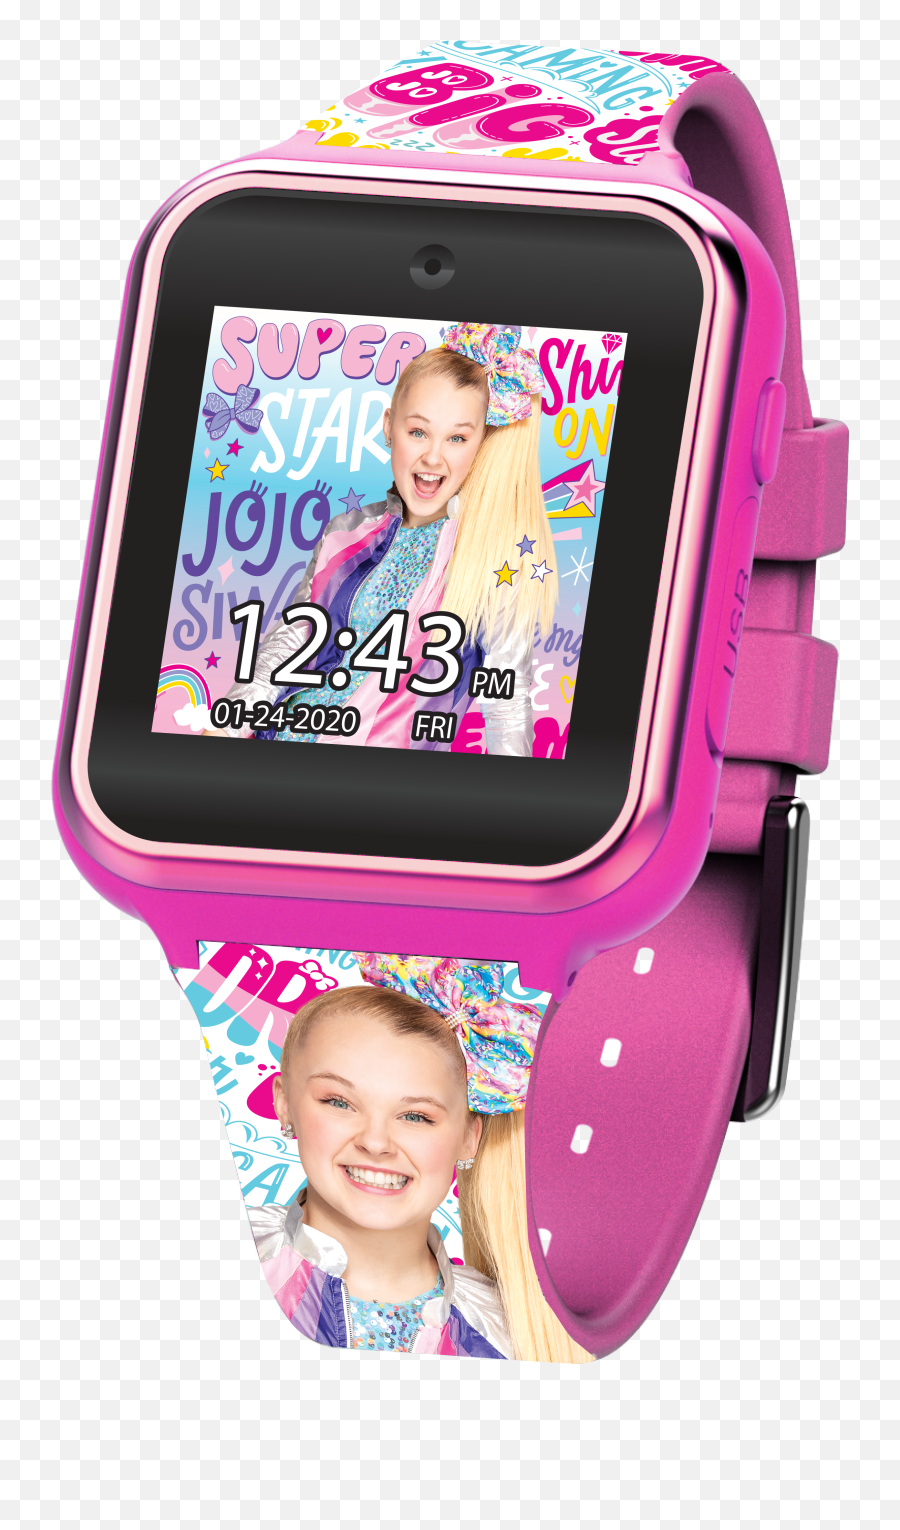 Buy Jojo Siwa Kids' Analog Watch with Silver-Tone Case, Pink Leather Strap,  Easy to Buckle - Kids' Watch with JoJo Siwa on the Dial, Safe for Children  - Model: JOJ5003 Online at